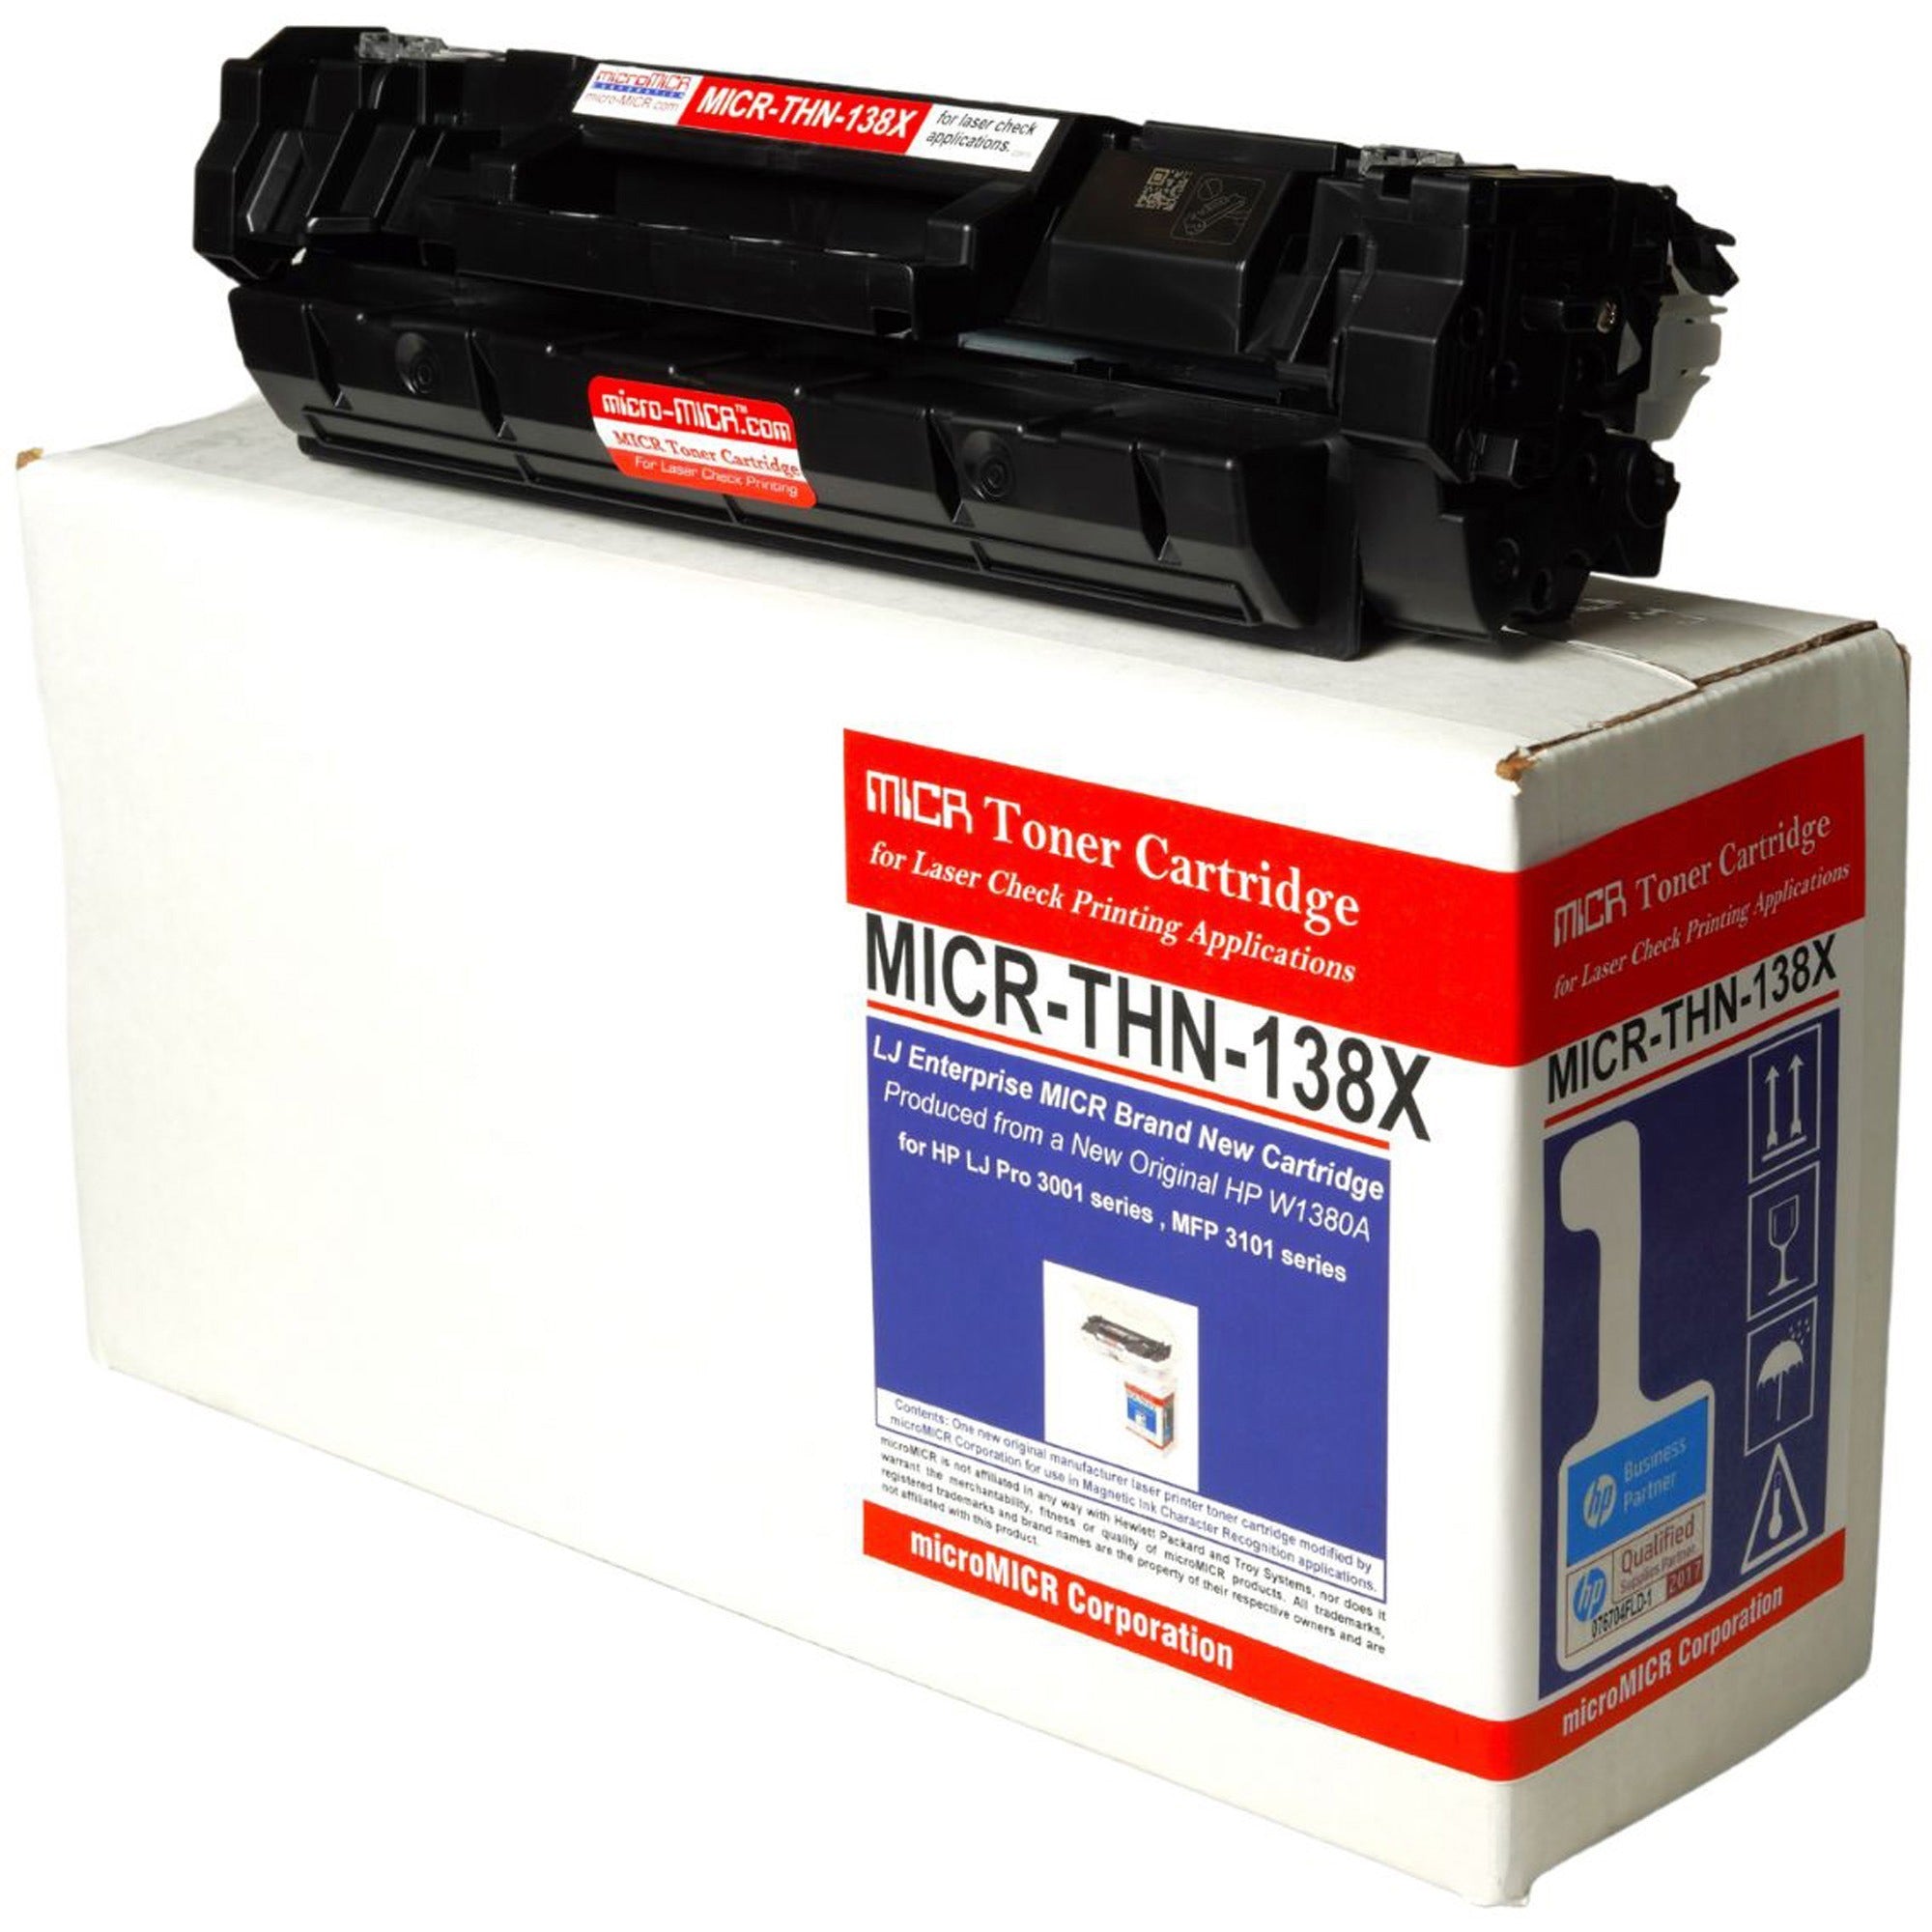 micromicr-micr-high-yield-laser-toner-cartridge-alternative-for-hp-138a-138x-w1480a-black-1-each-4000-pages_mcmmicrthn138x - 1